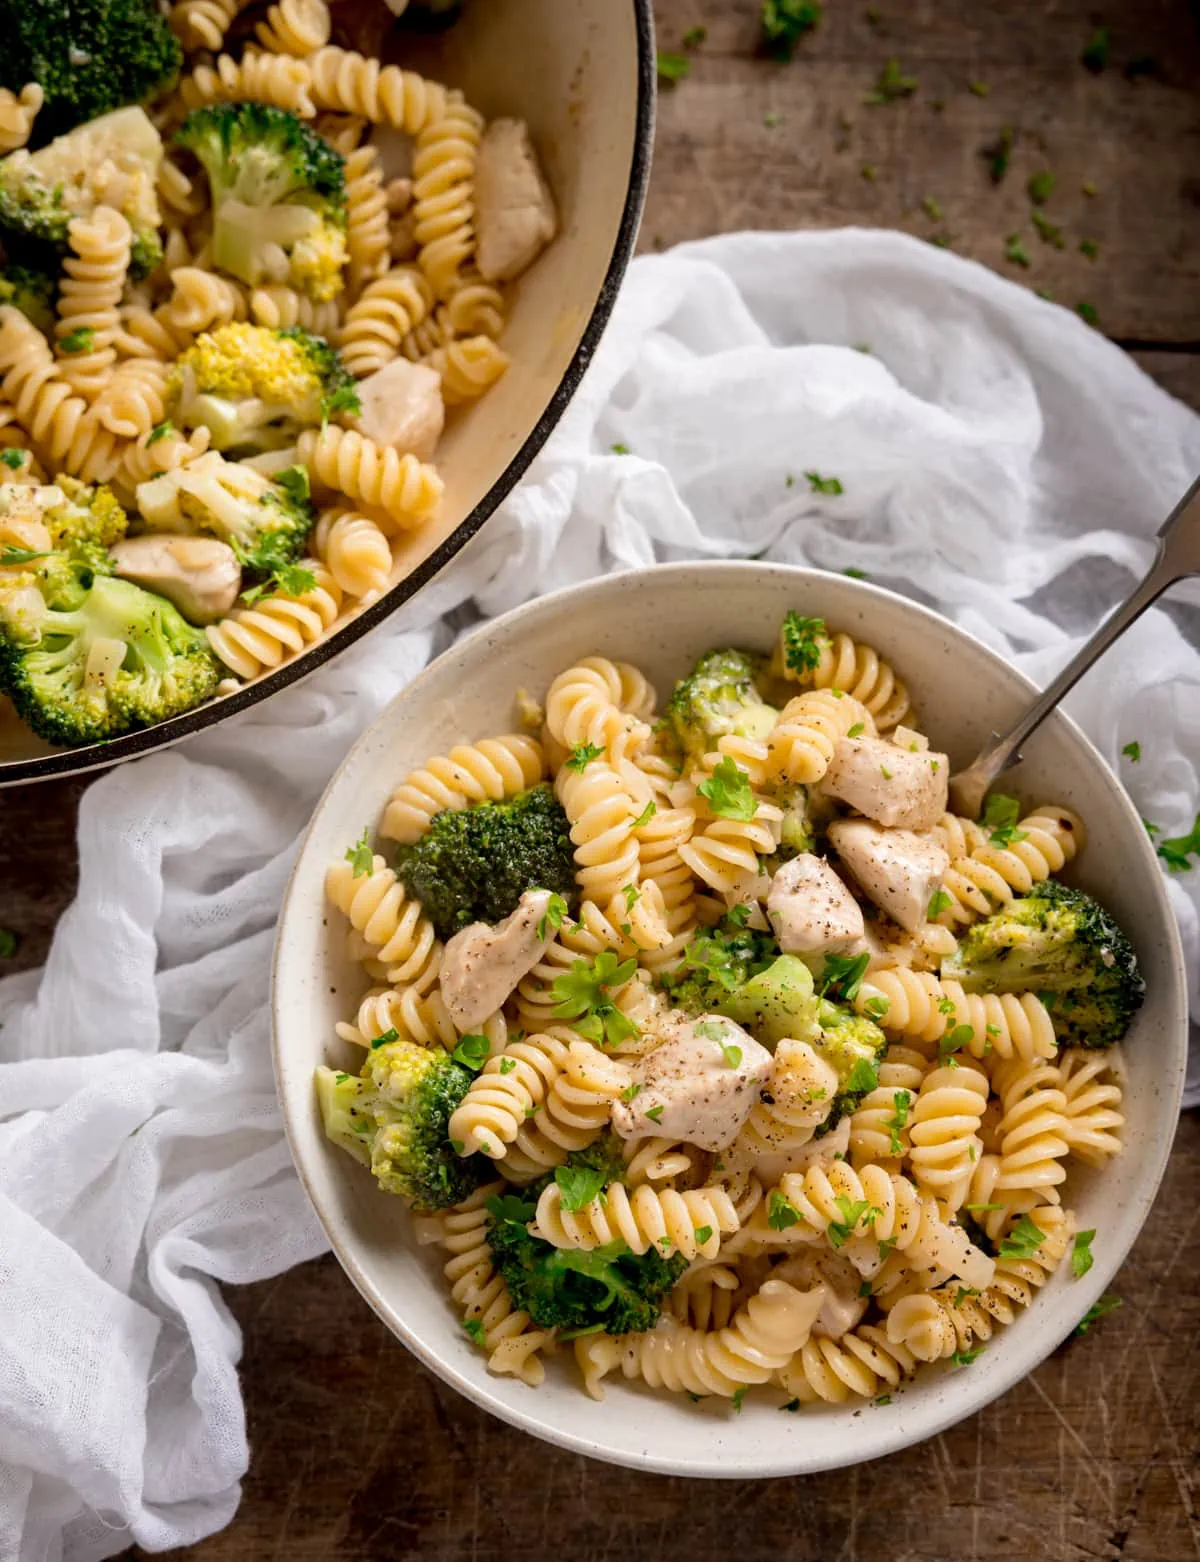 Overhead shot of chicken and broccoli pasta in a white bowl with a fork sticking out. The bowl is on a wooden table with the pan of pasta and a white napkin nearby.